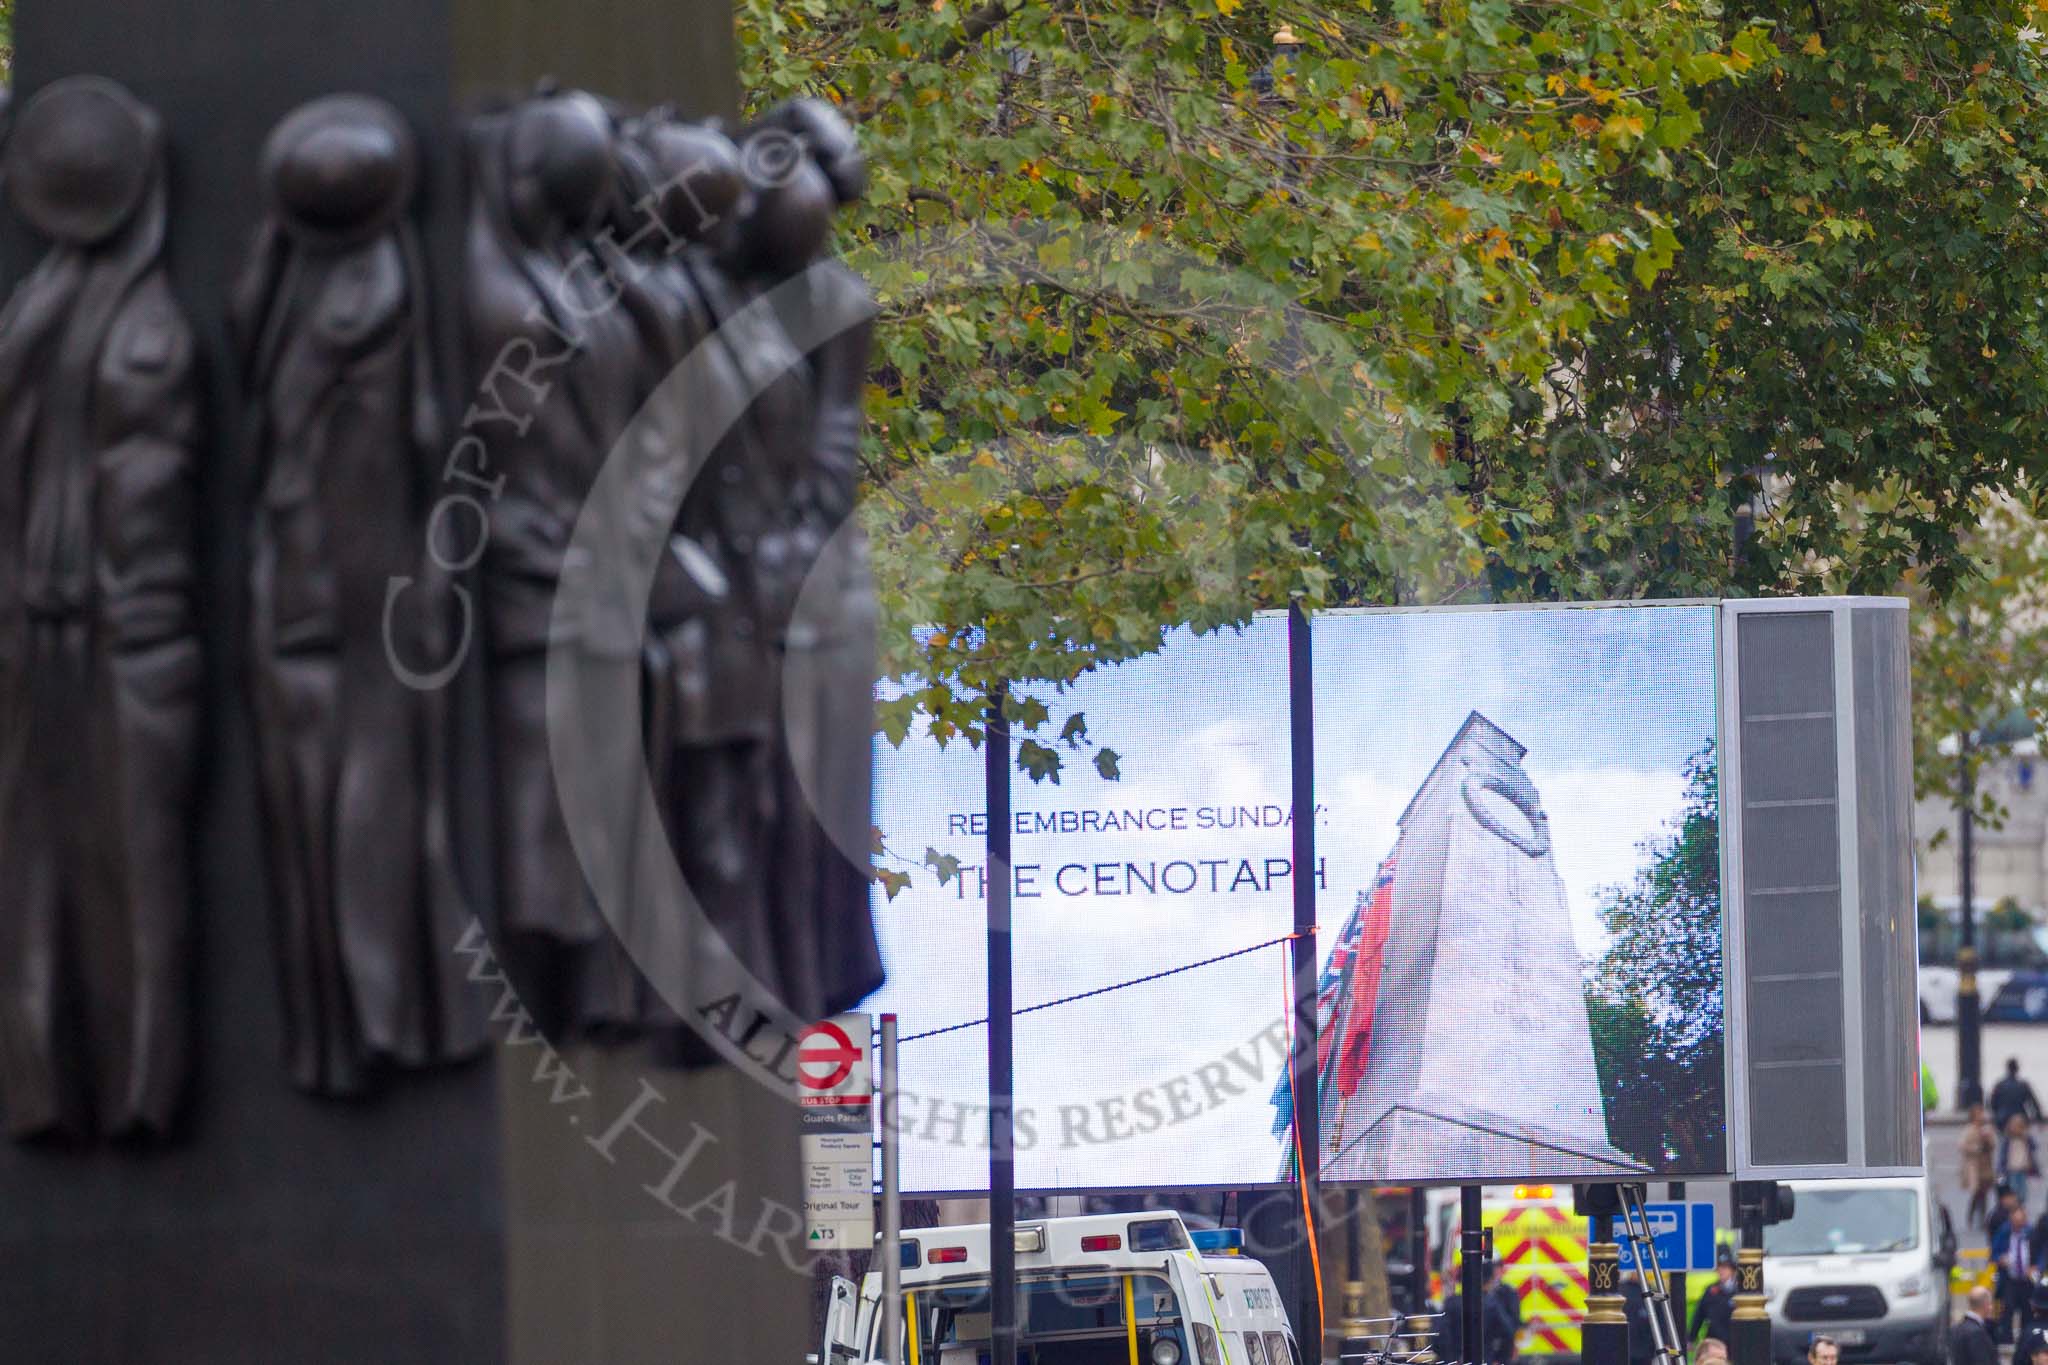 Remembrance Sunday at the Cenotaph 2015: One of the big TV screens on Whitehall, behind the Memorial for Women in World War II. Image #1, 08 November 2015 08:14 Whitehall, London, UK